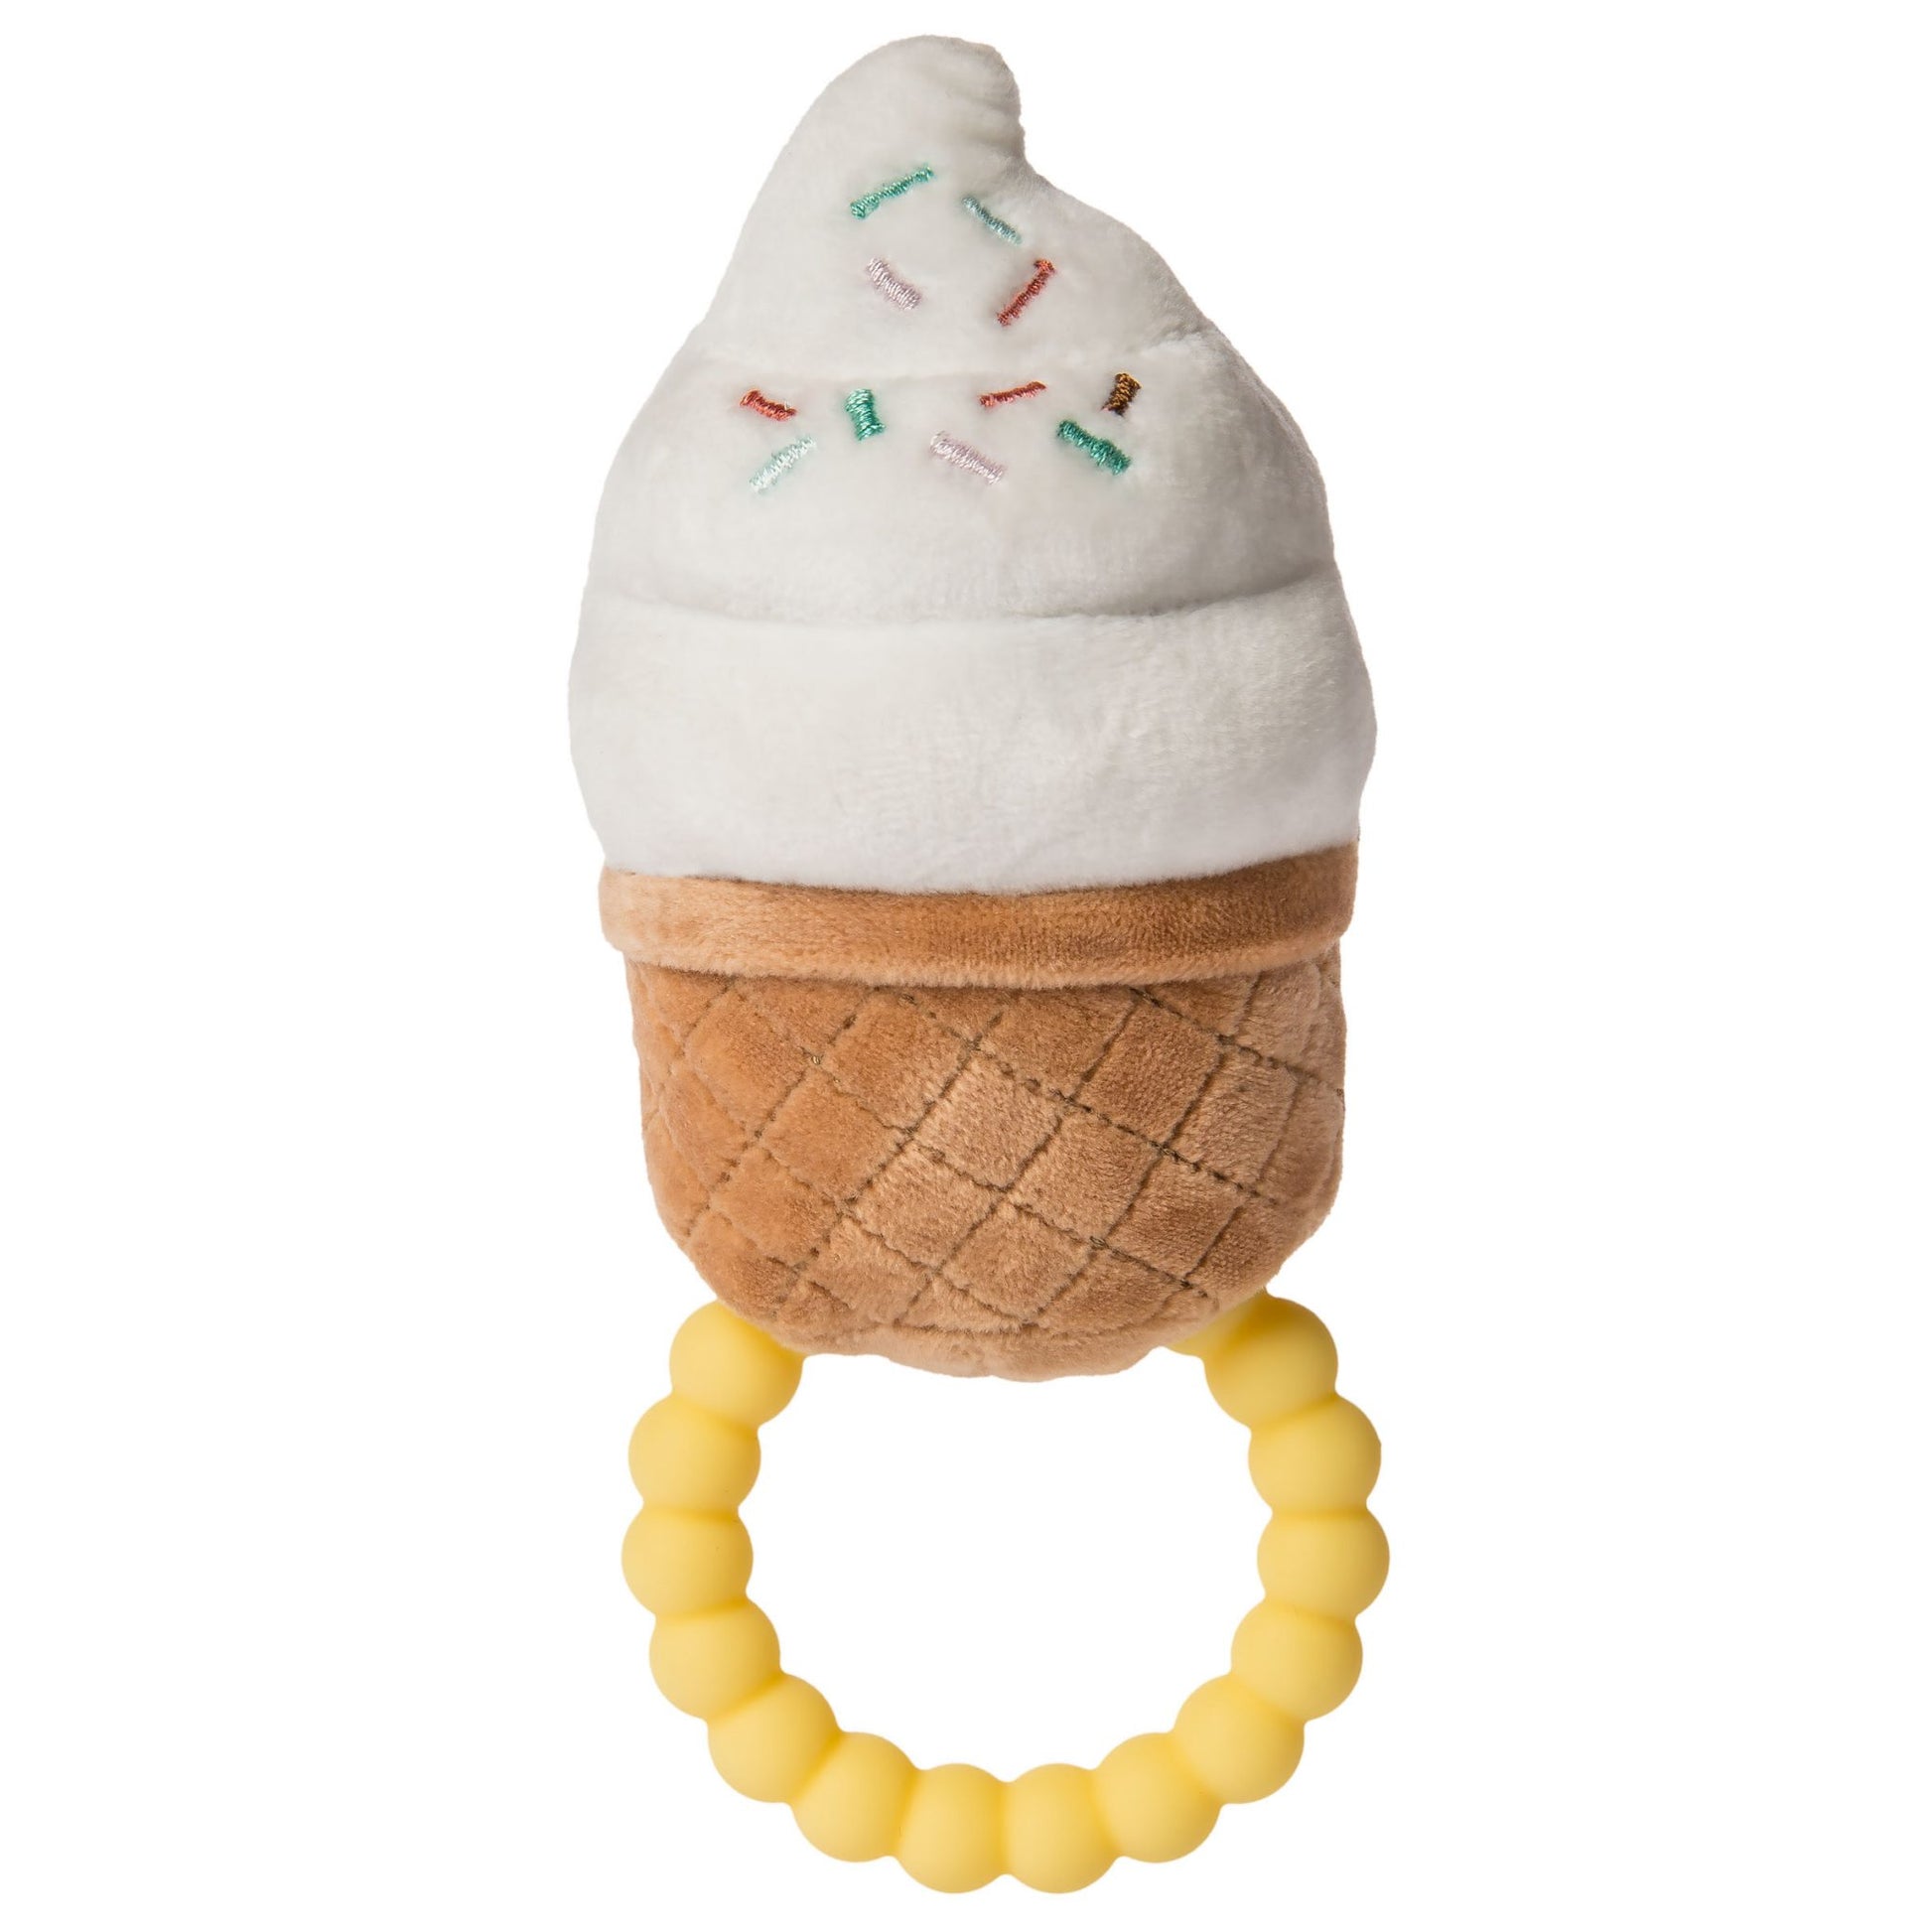 Sprinkly Ice Cream Teether Rattle 